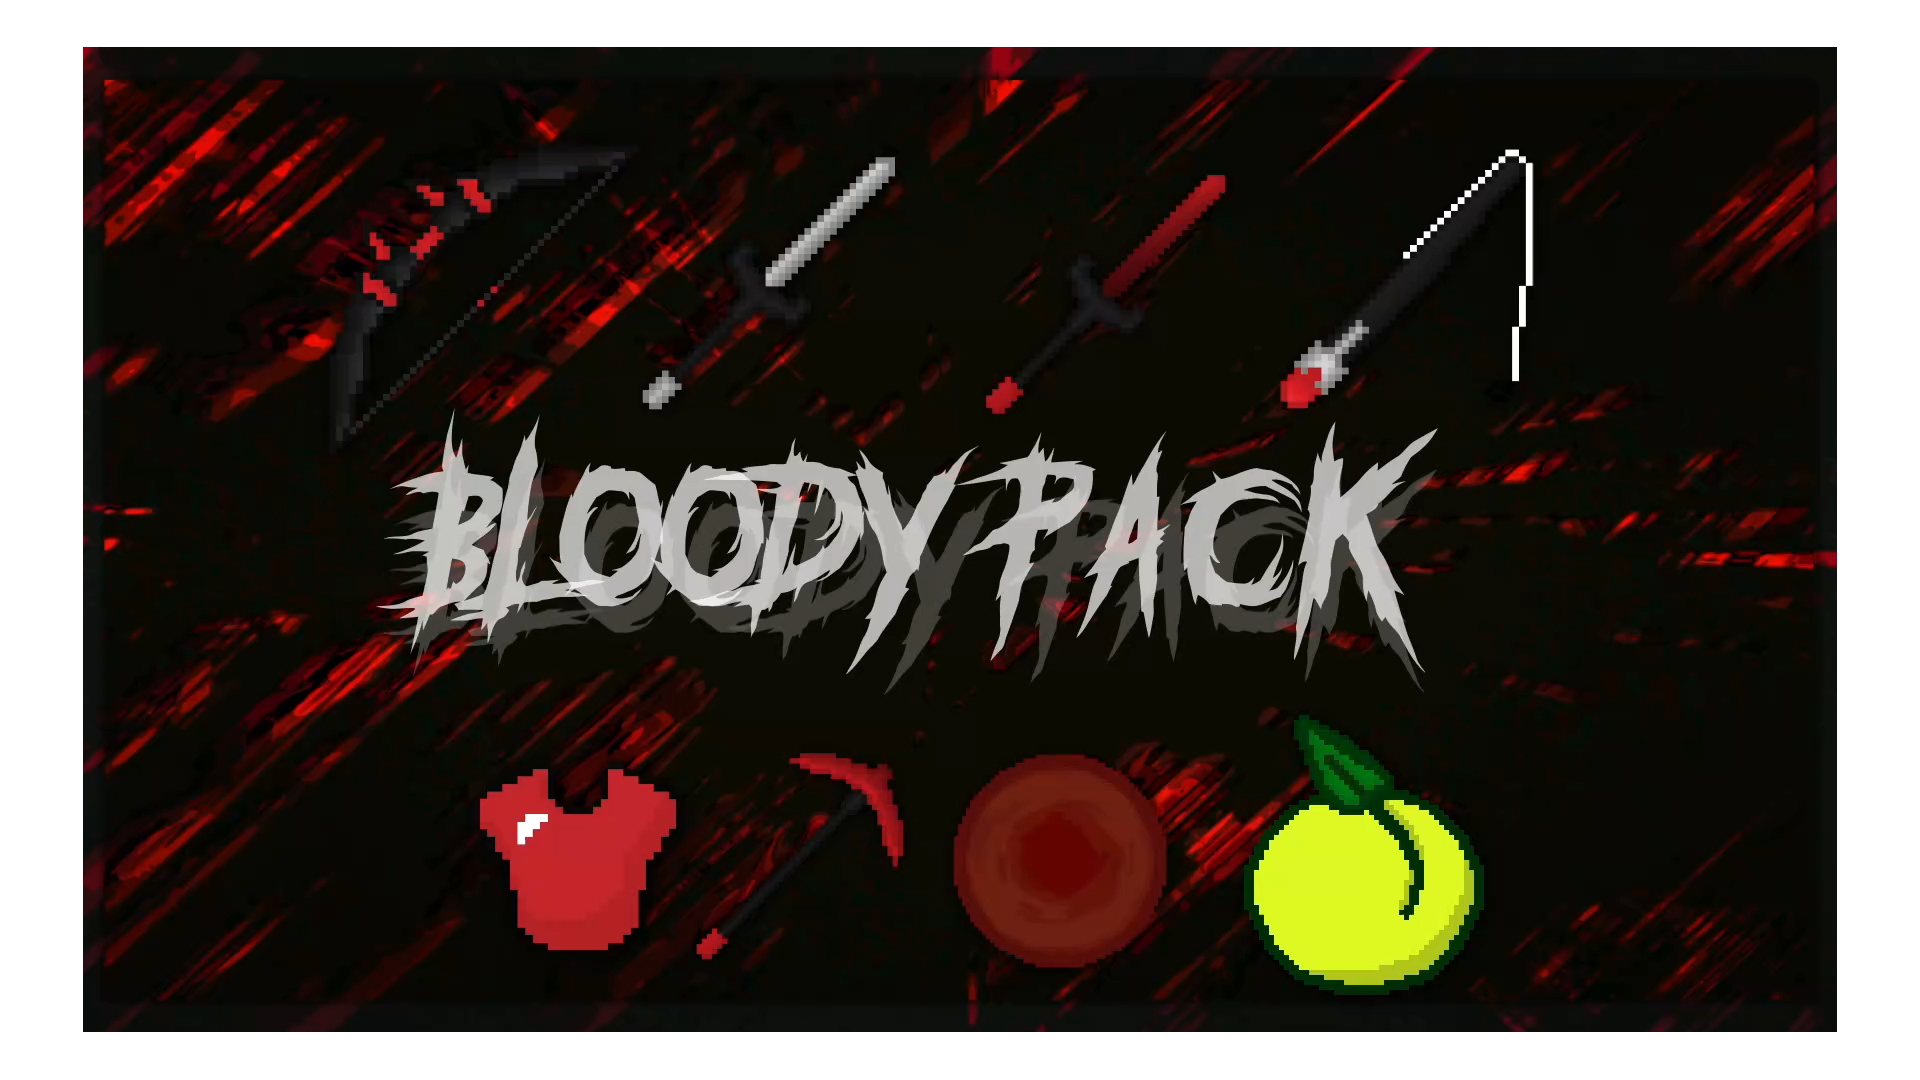 BloodyPack ( Red x64x ) Minecraft Texture Pack